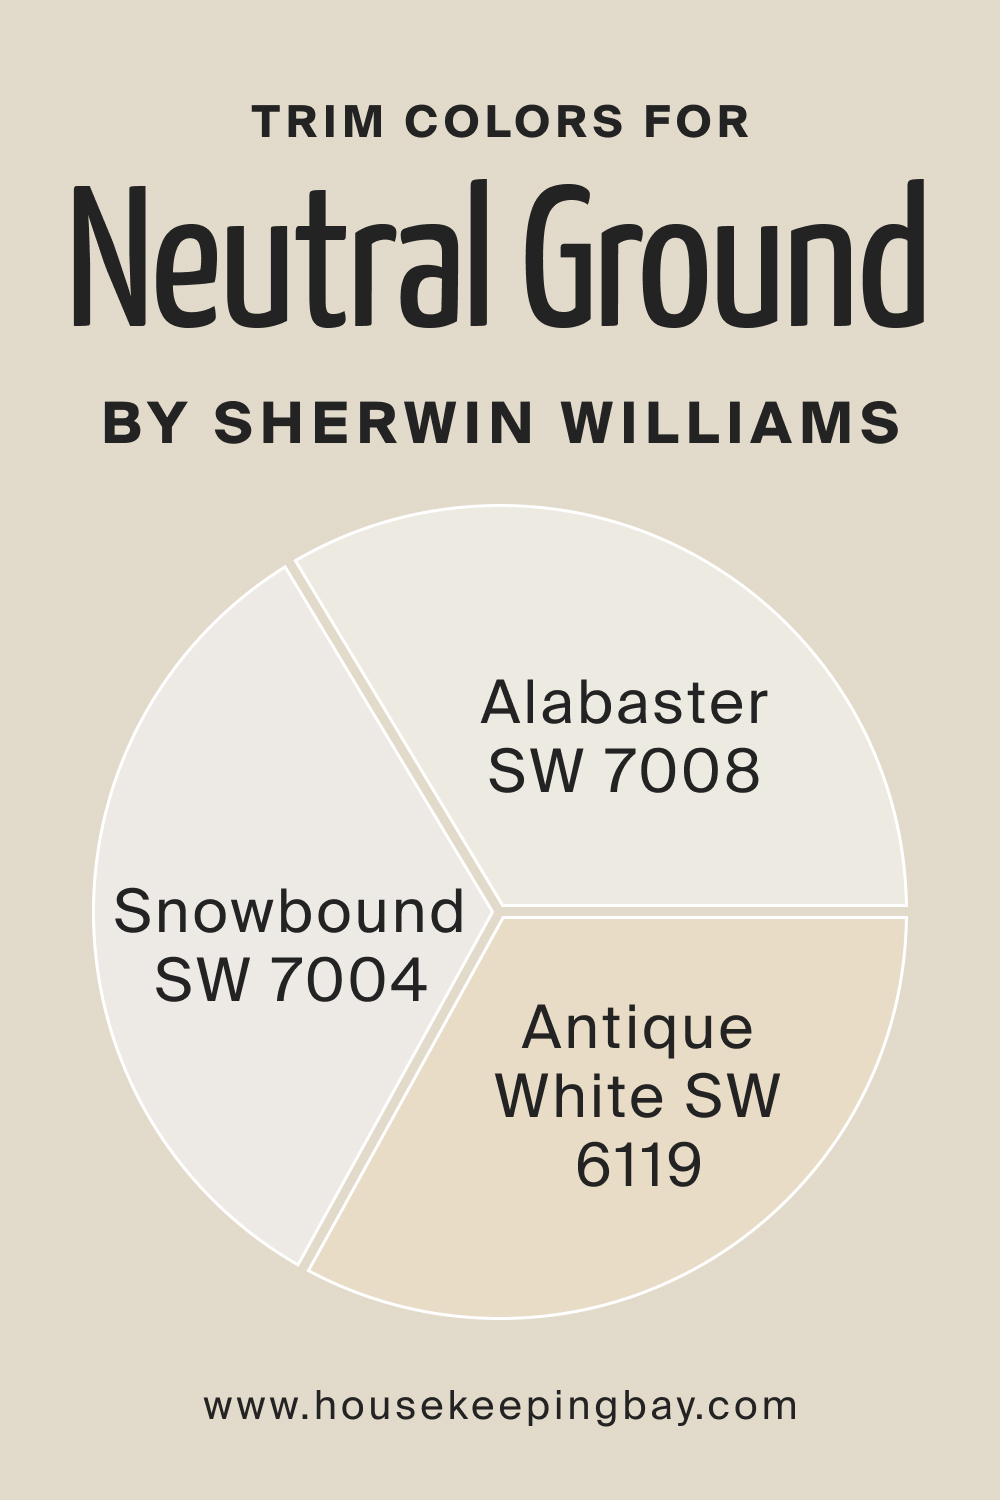 Trim Color of Neutral Ground by Sherwin Williams